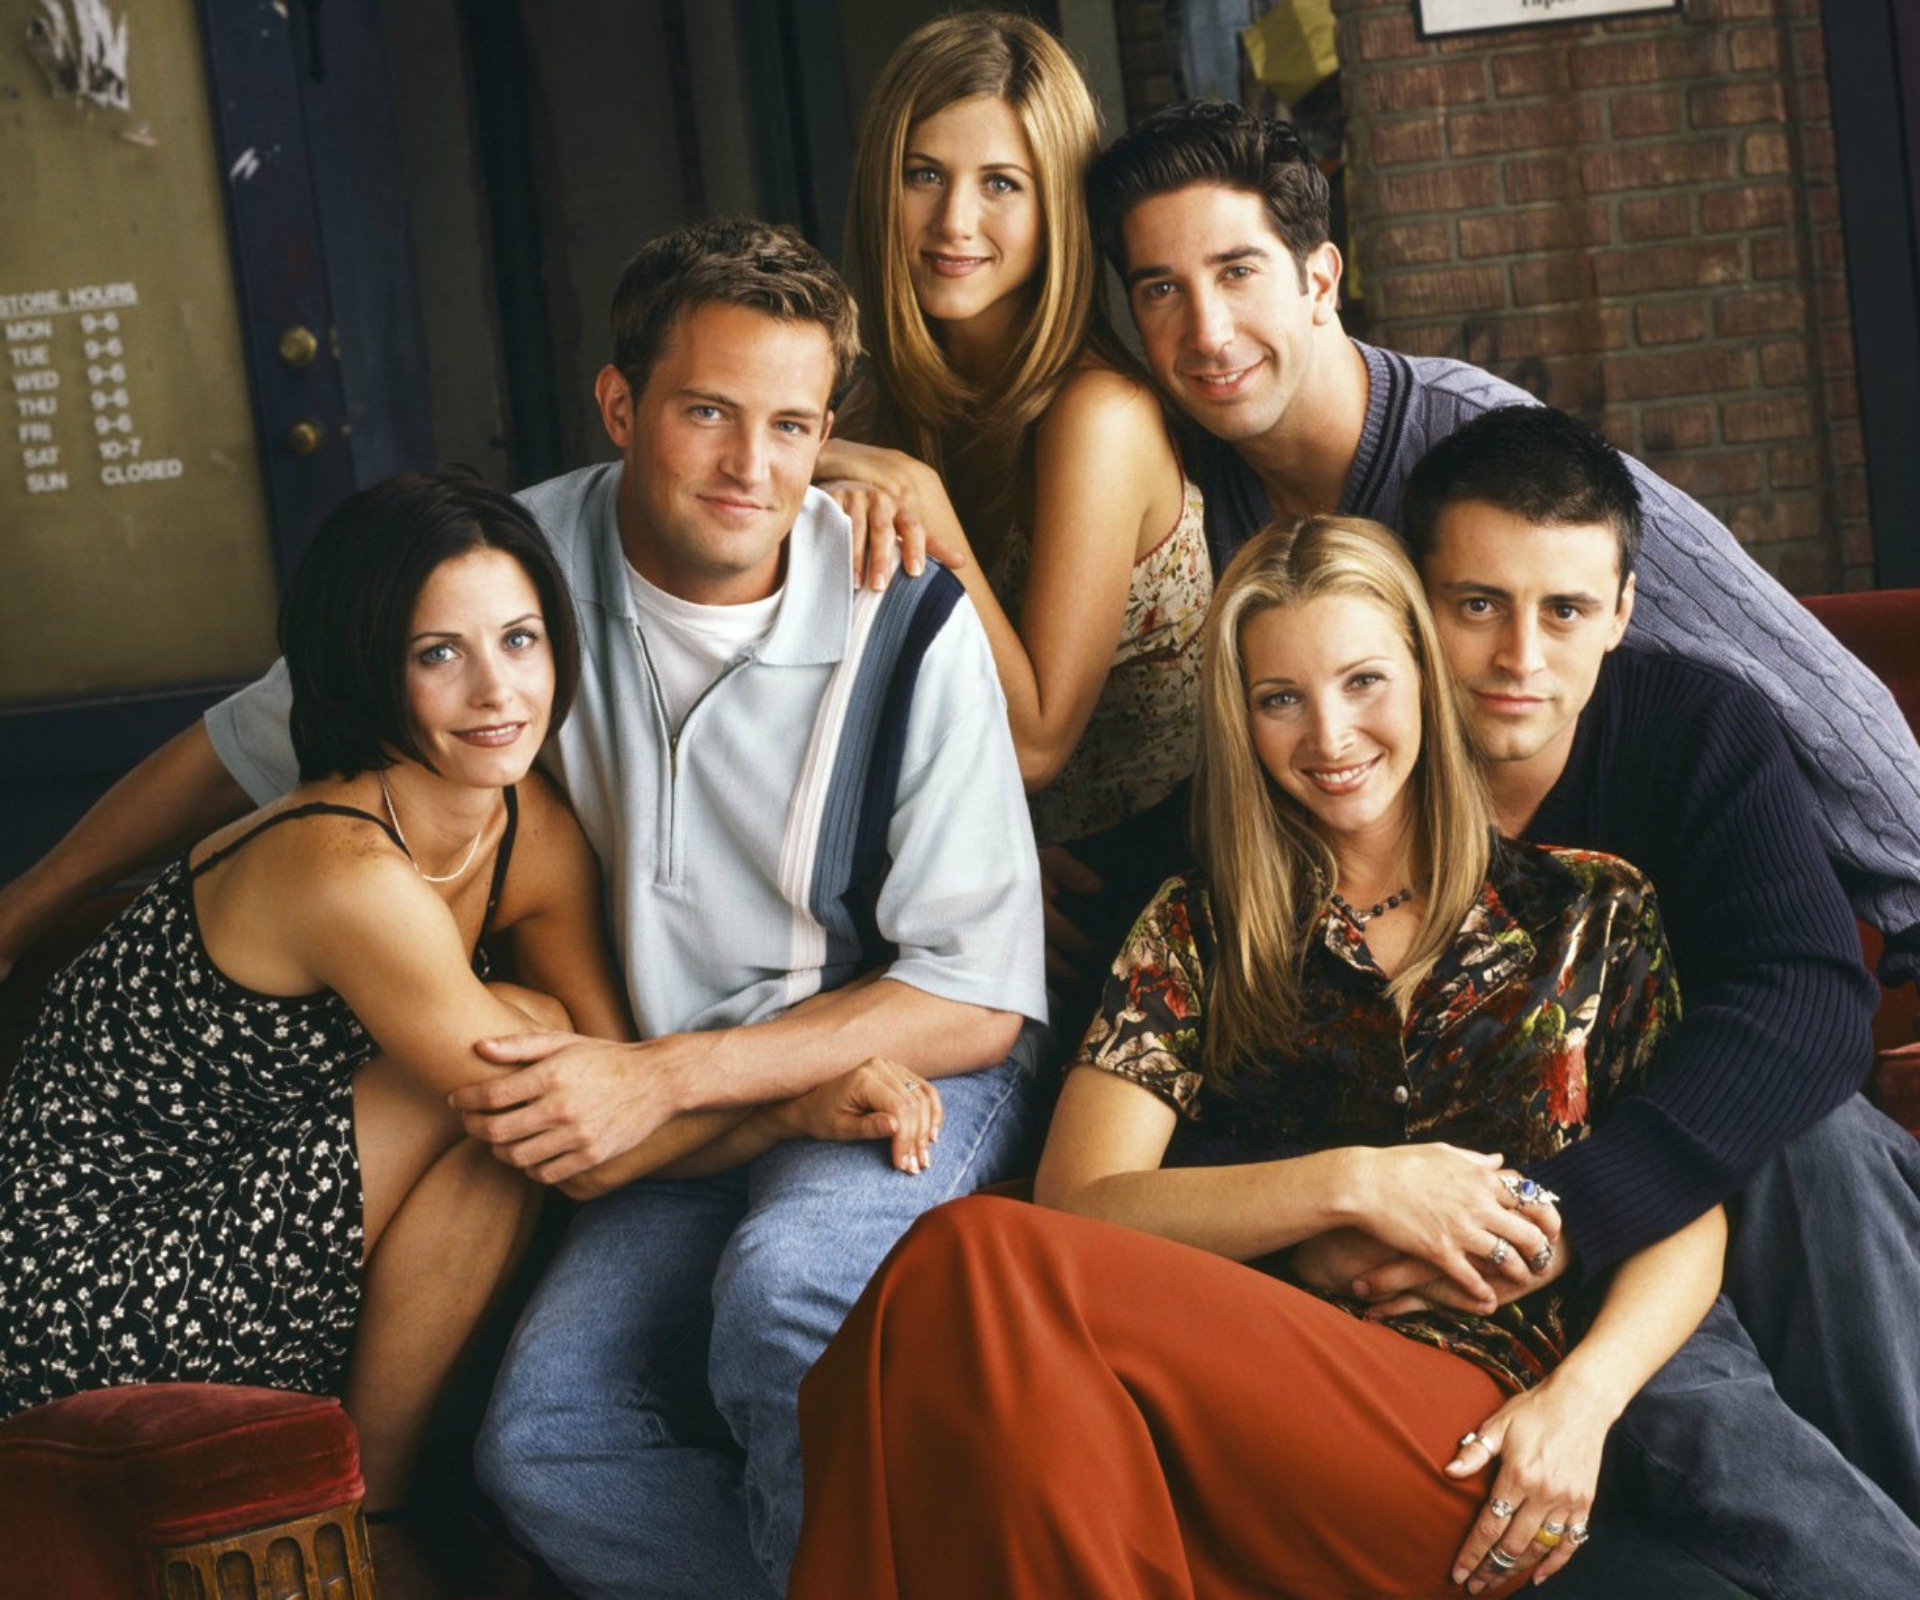 David Schwimmer says Friends cast broke “no-sex” clause in TV contracts